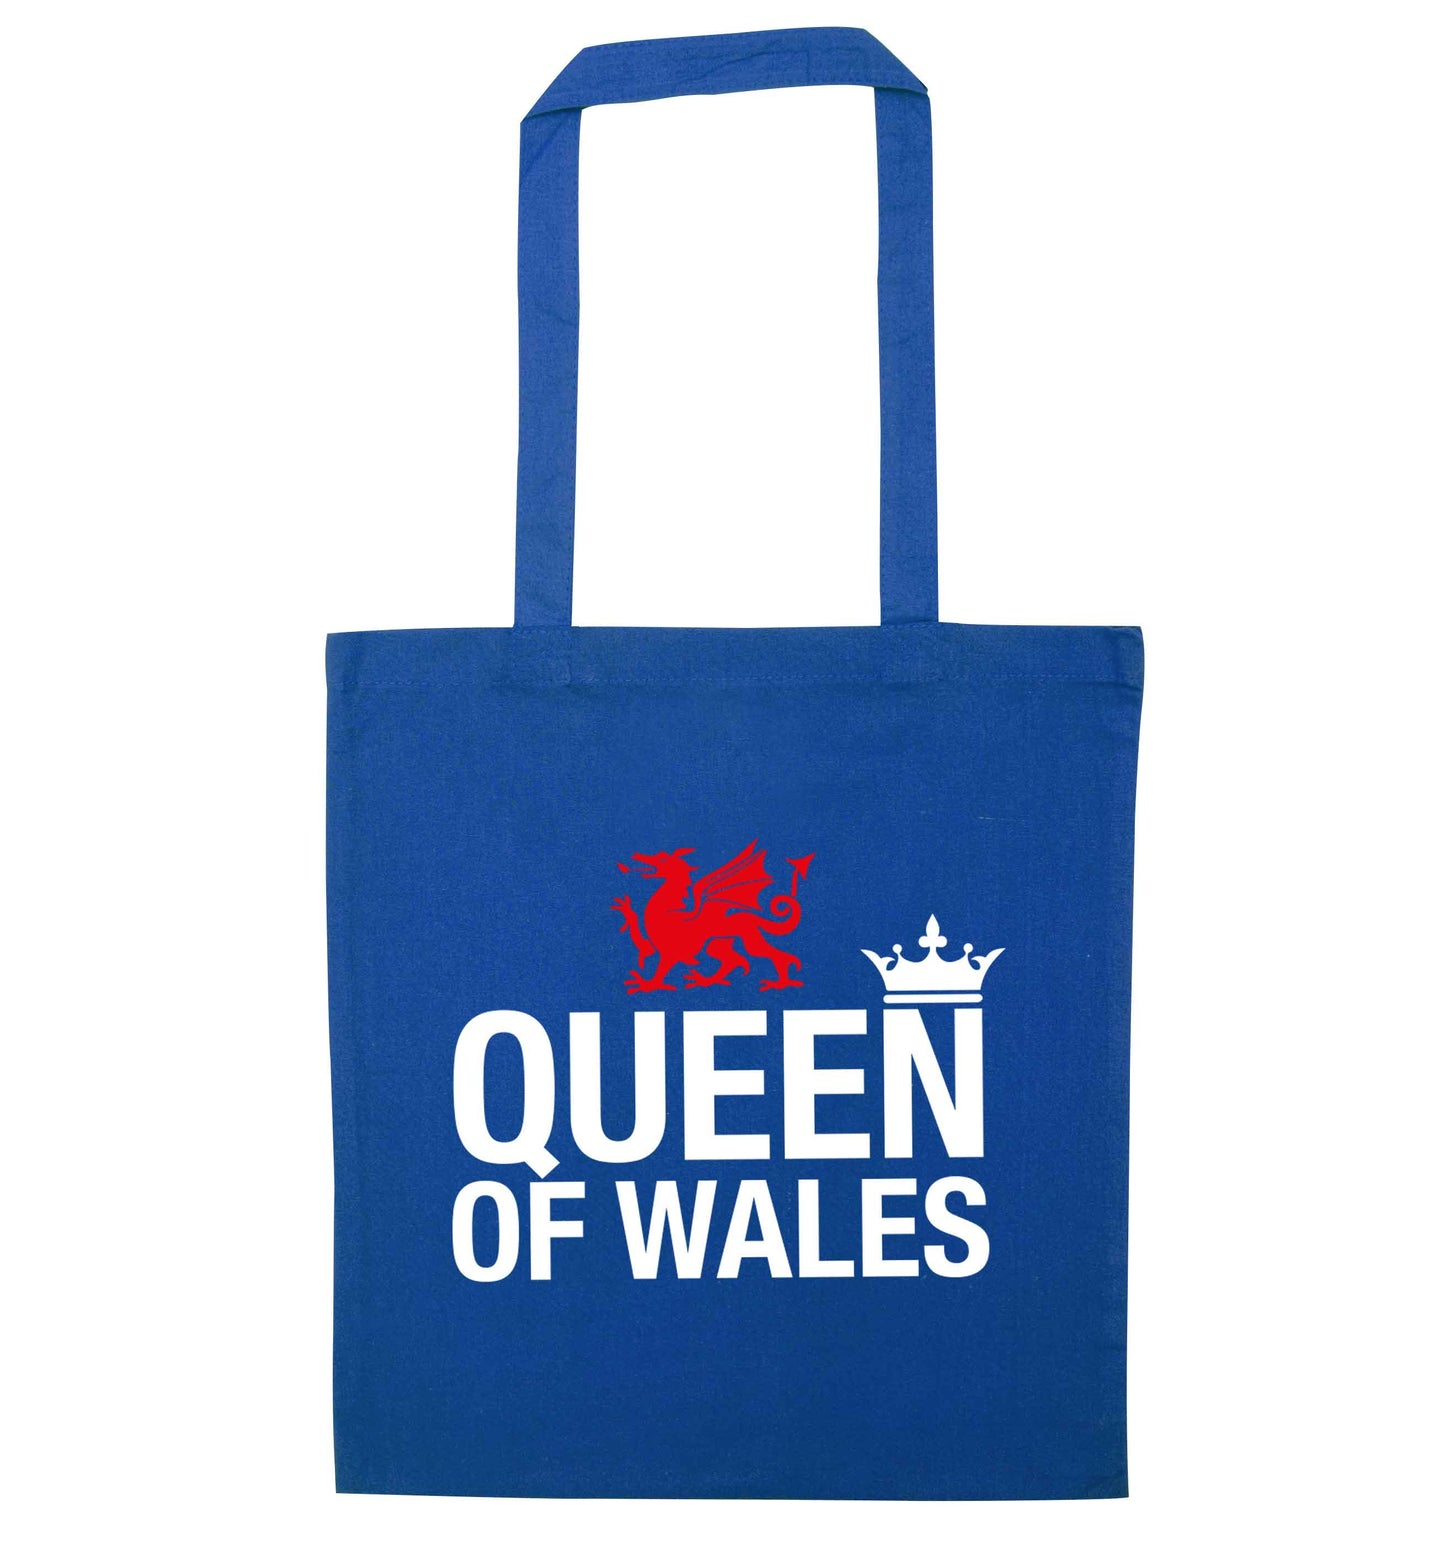 Queen of Wales blue tote bag